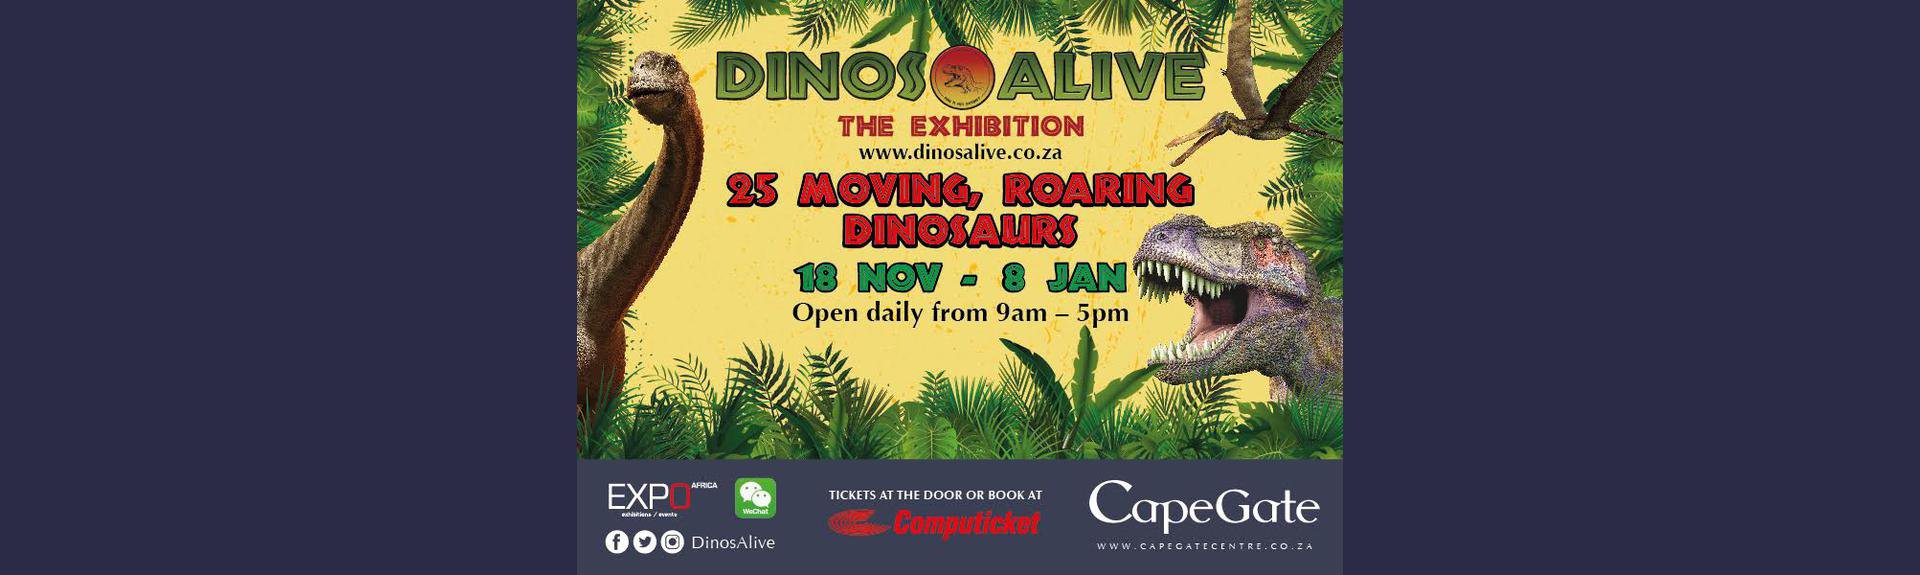 DinosAlive|Shows|Holiday Program|Things to do with Kids